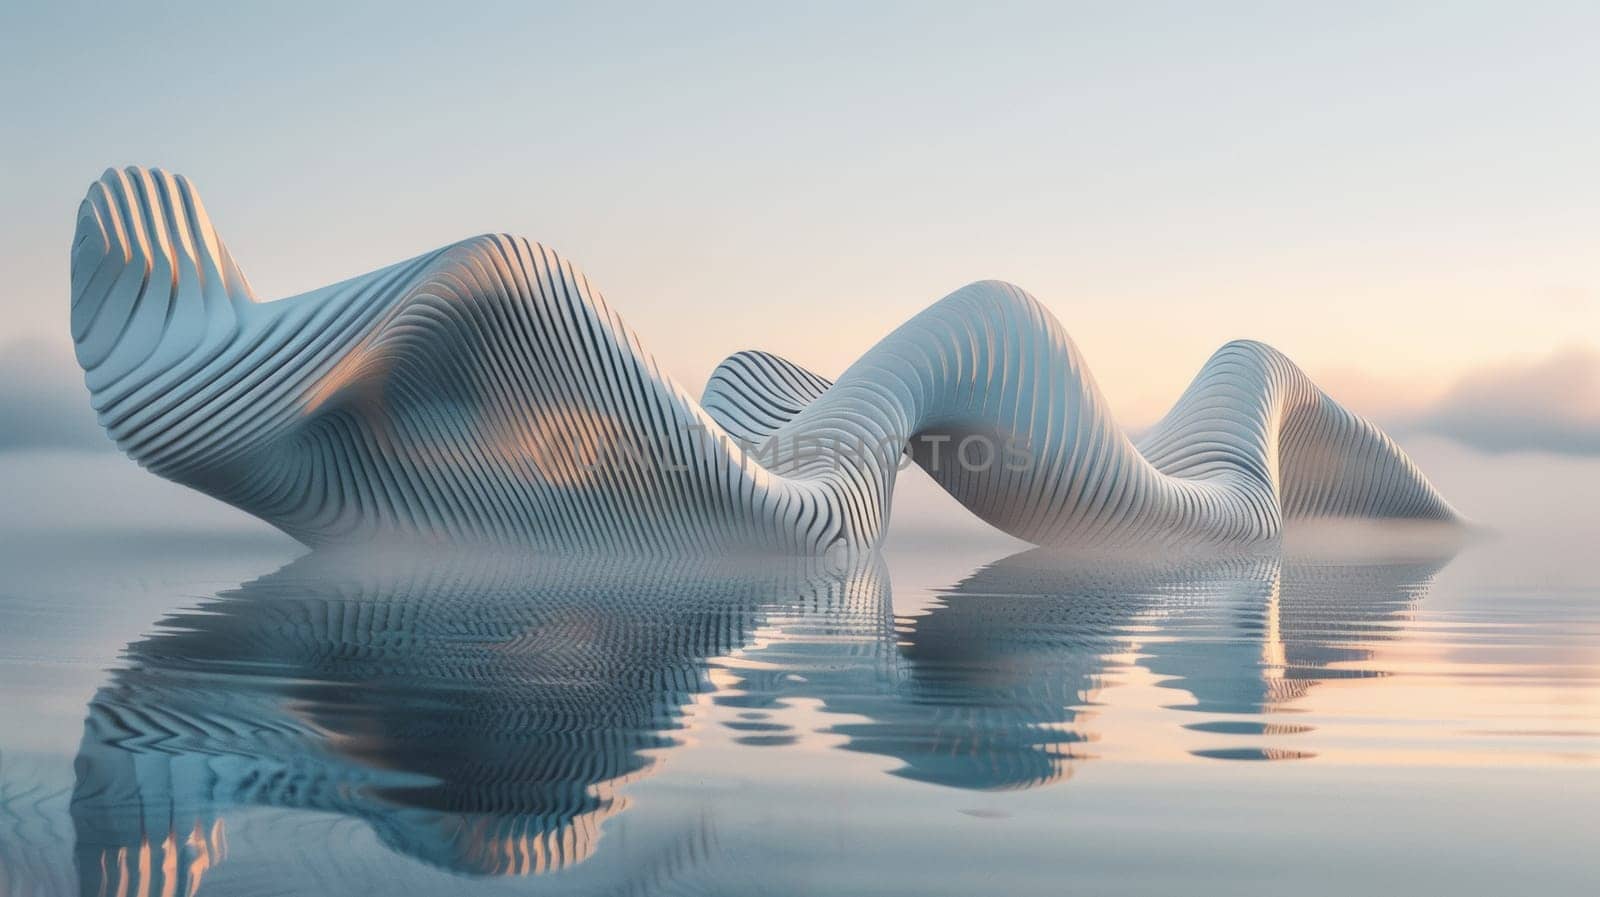 A sculpture of a wave in the water with some clouds, AI by starush